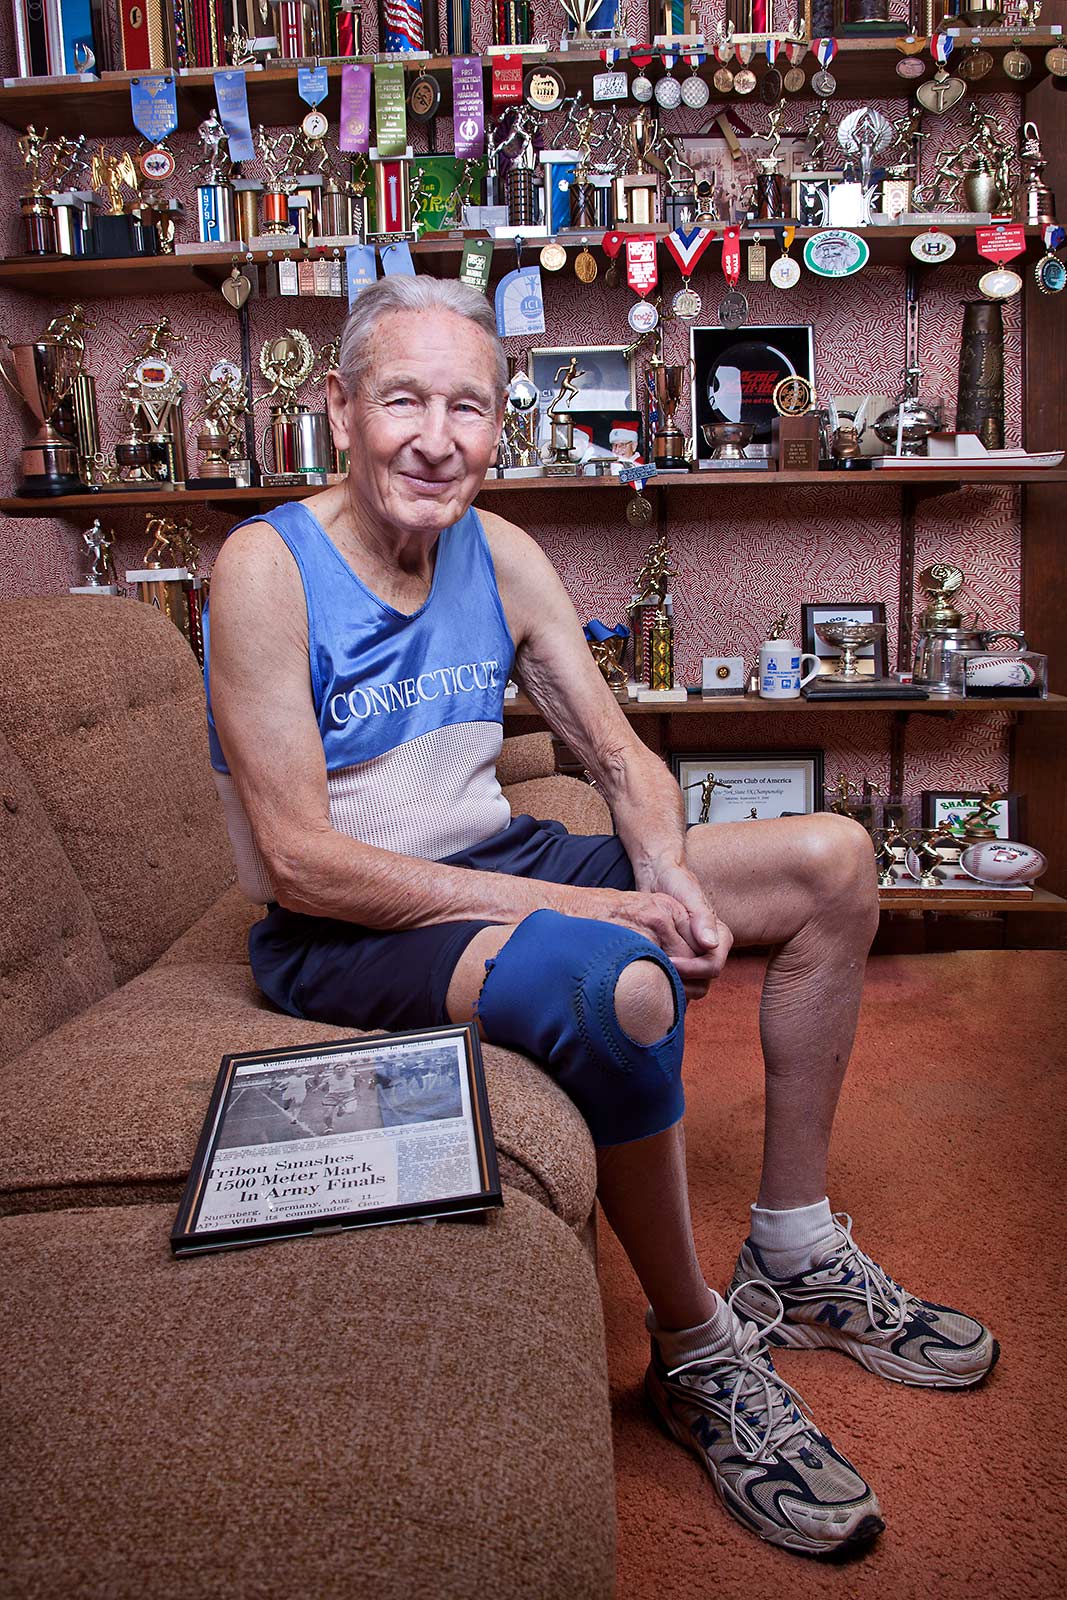 An accomplished elderly runner wearing his race outfit smiles with his trophies in his Connecticut home